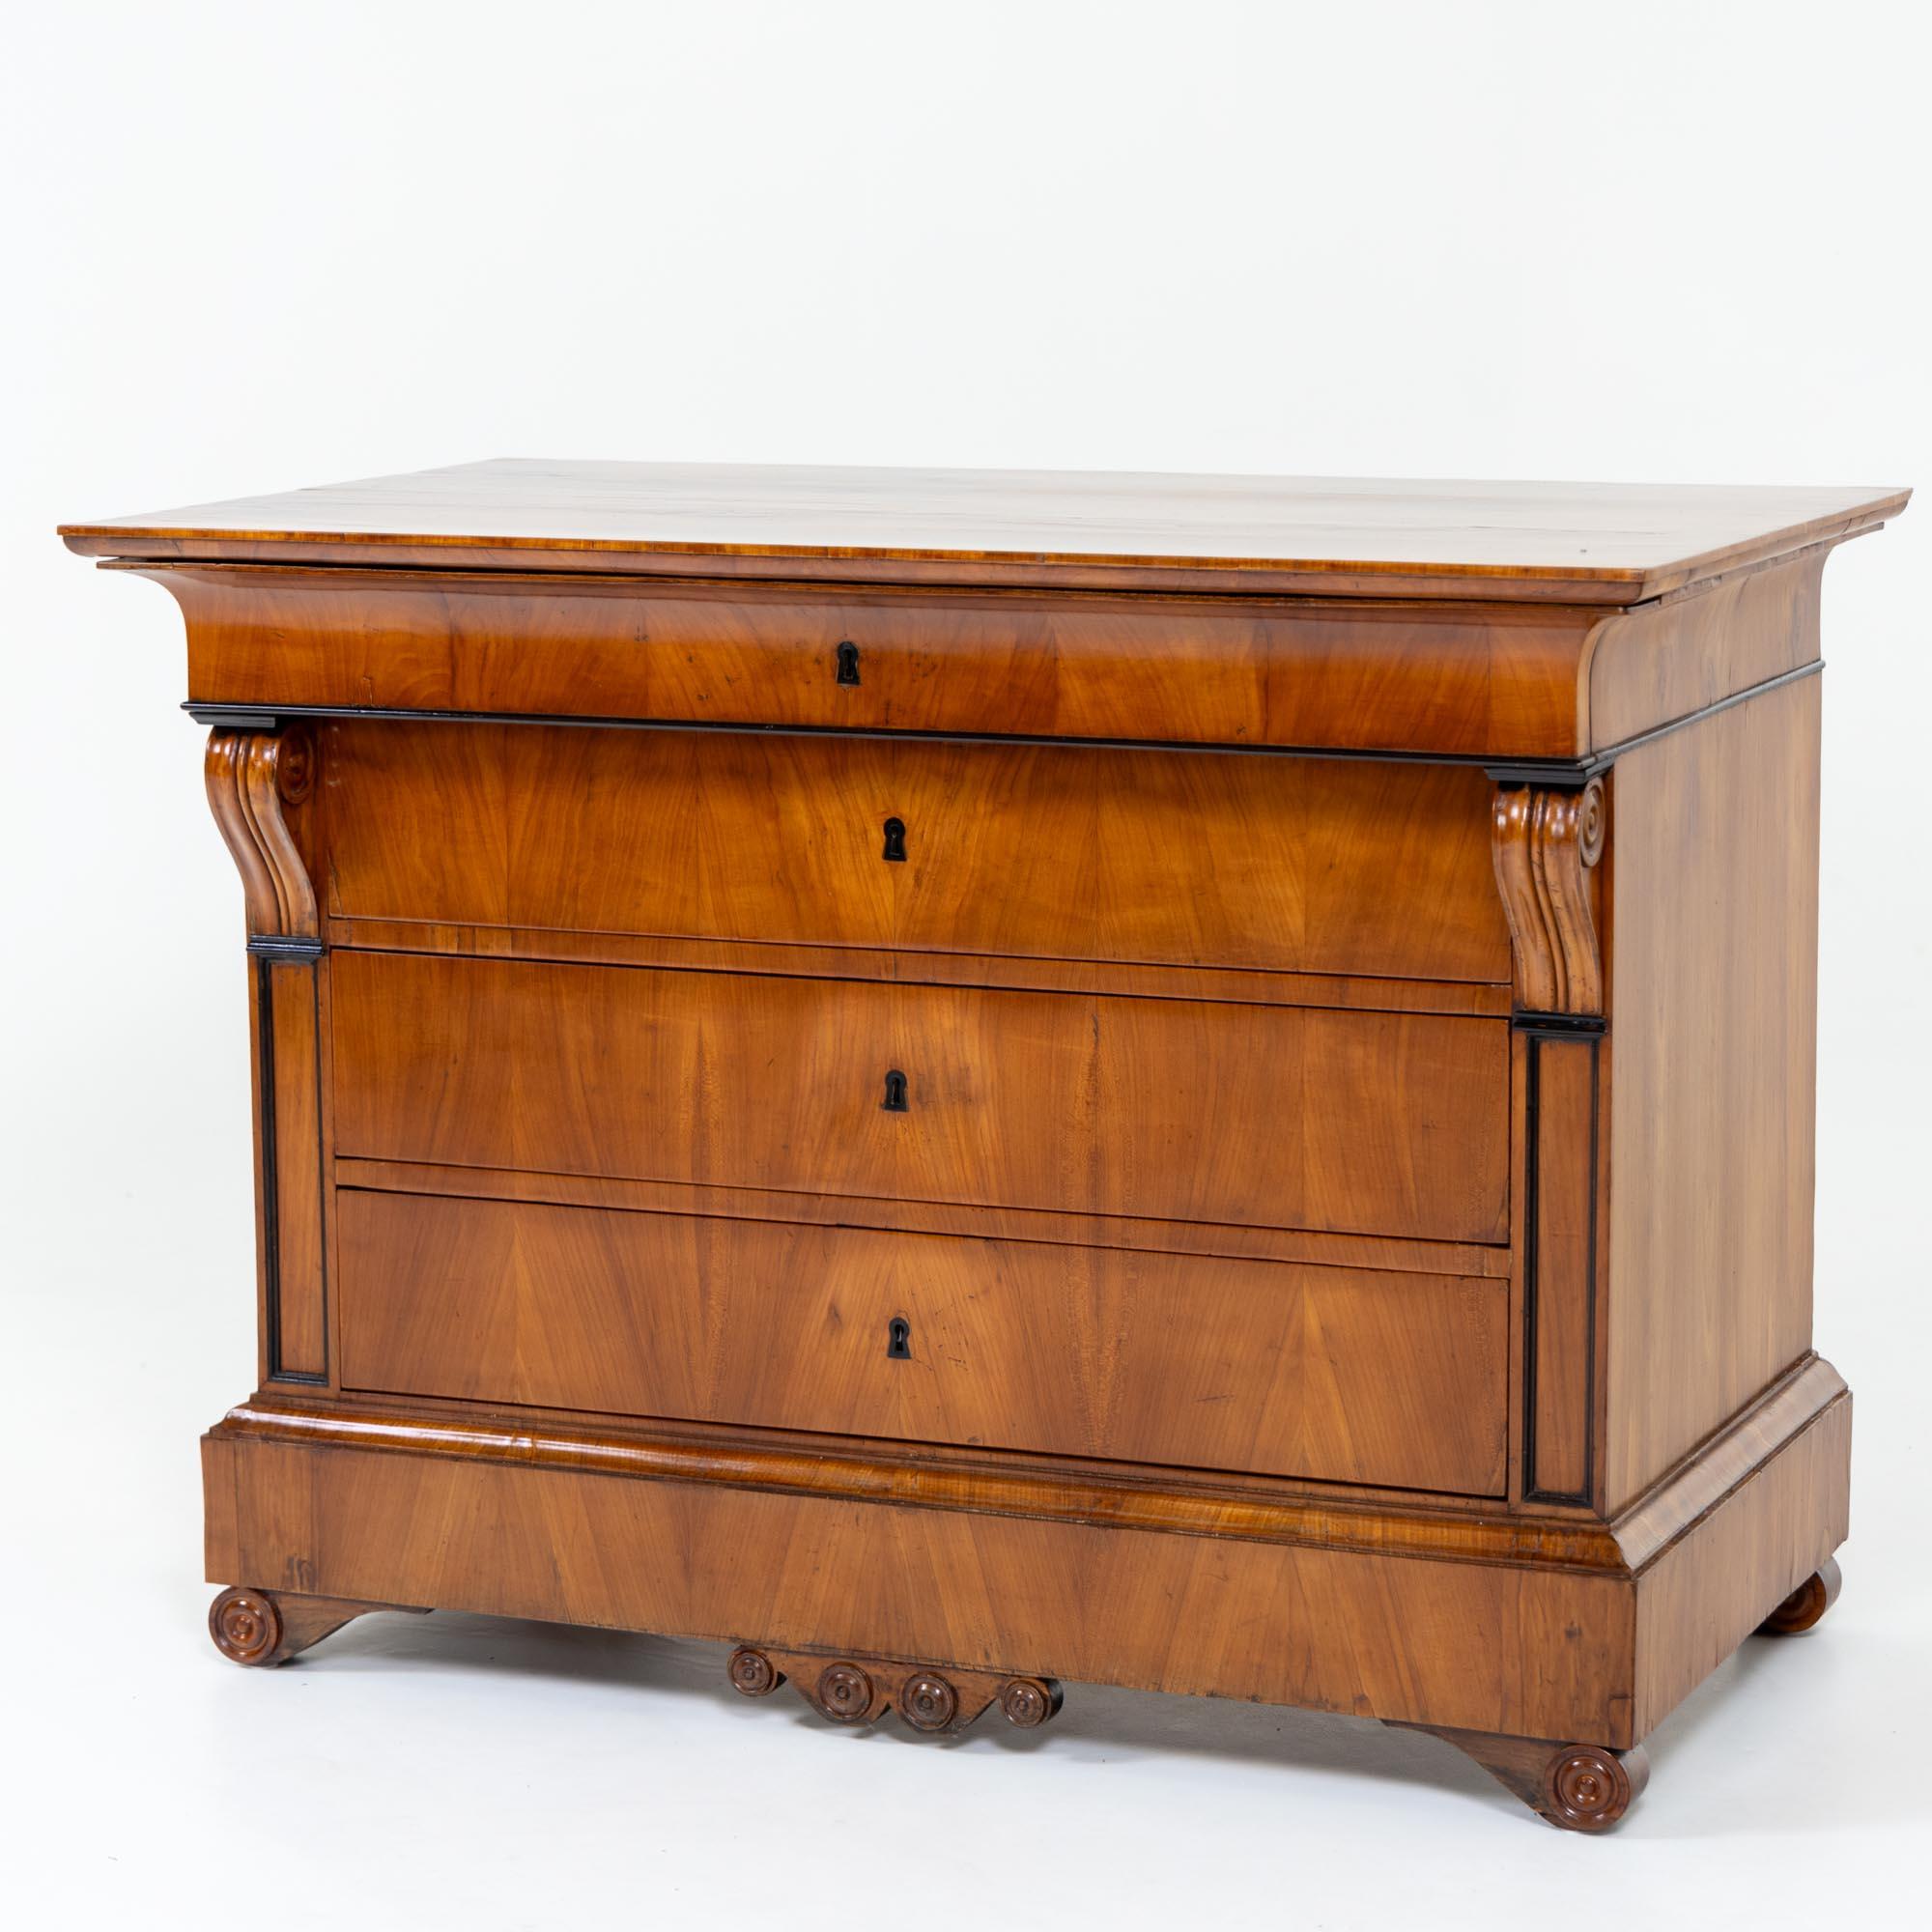 Biedermeier chest with volute legs, veneered in cherry with four drawers. The corpus with flanking volute capitals and ebonised mouldings rises above the wide plinth zone. The head drawer is slightly lower and is finished off by the profiled top.